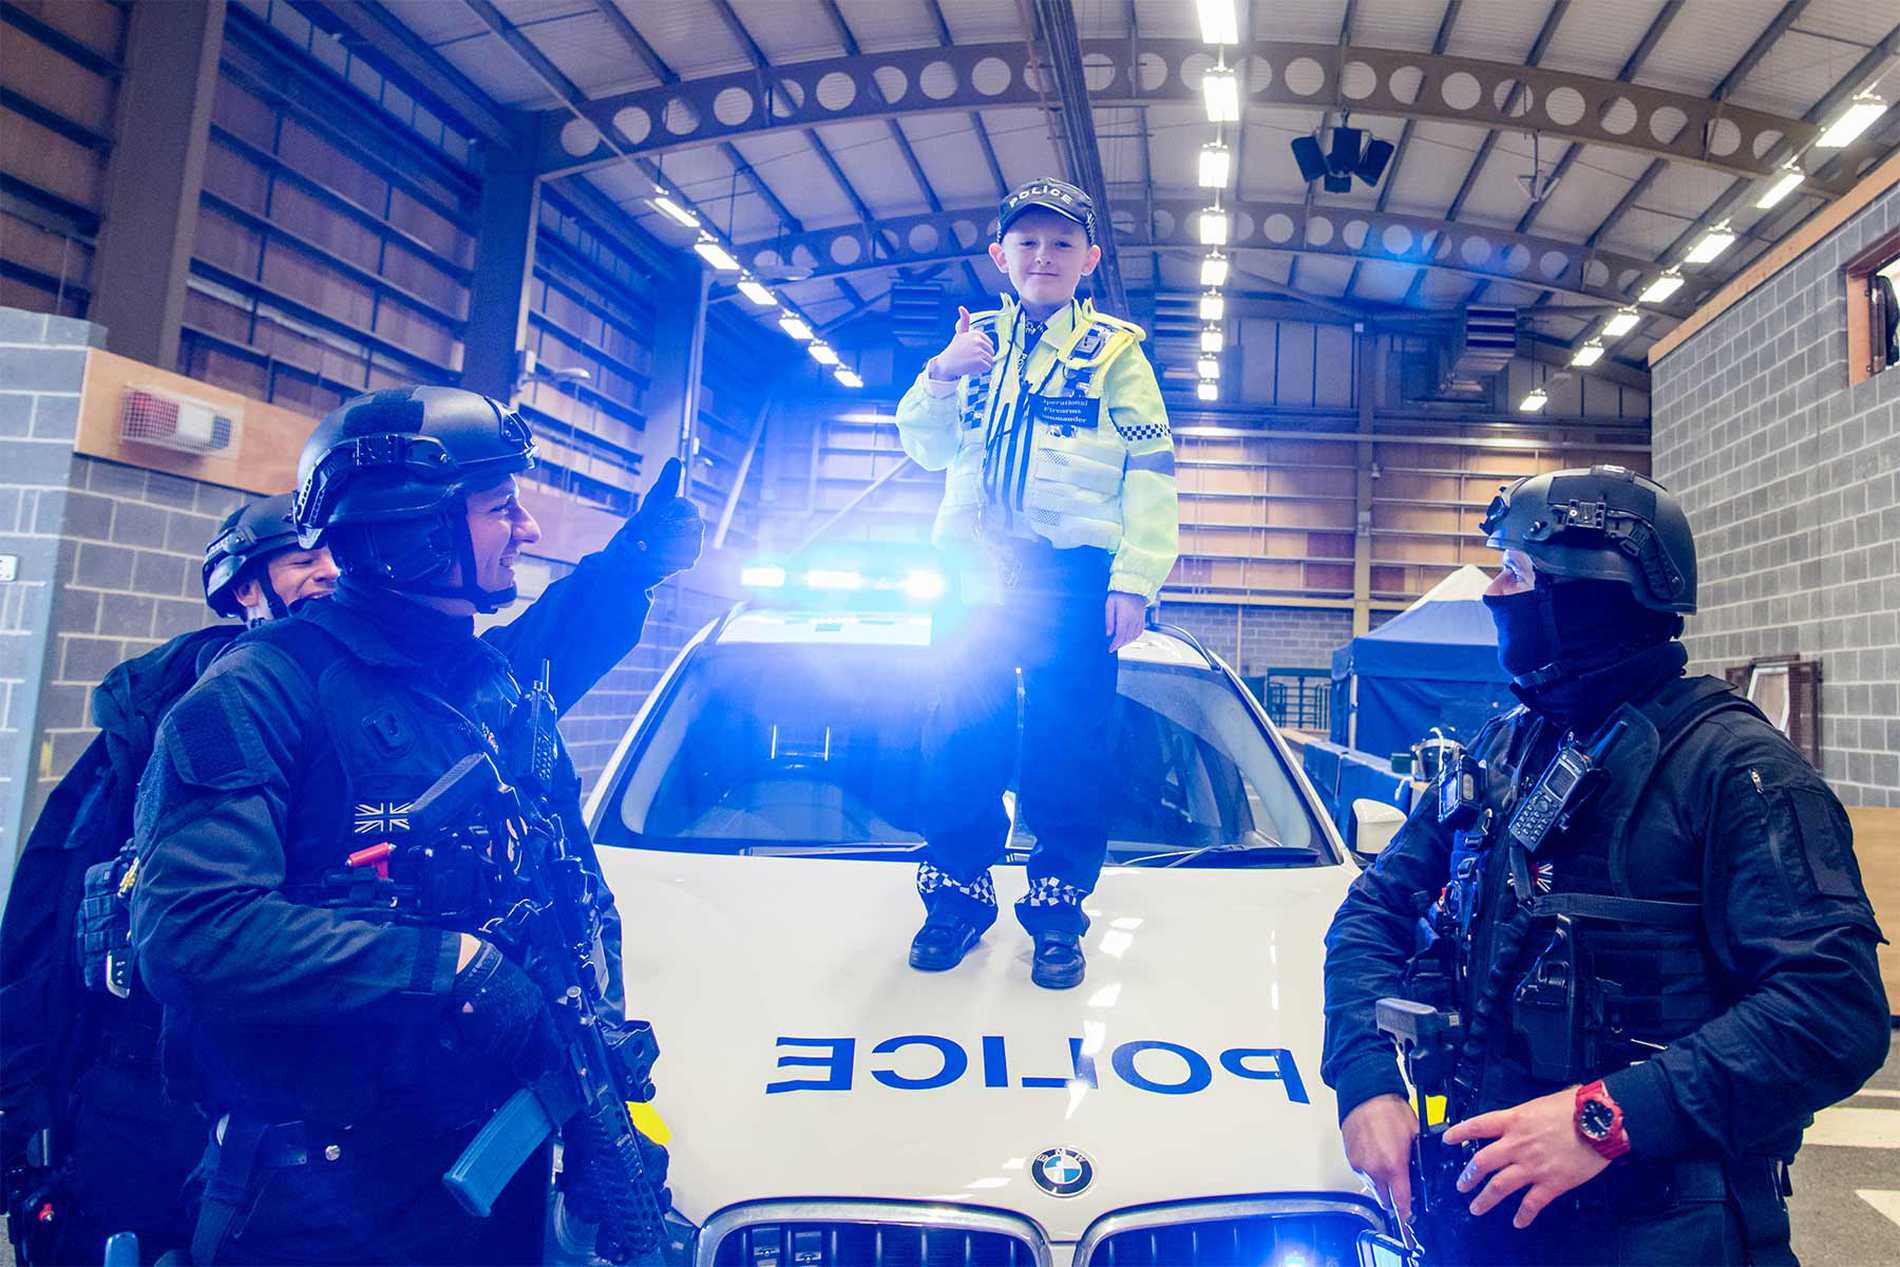 Allan standing on the bonnet of a police car with armed response officers.